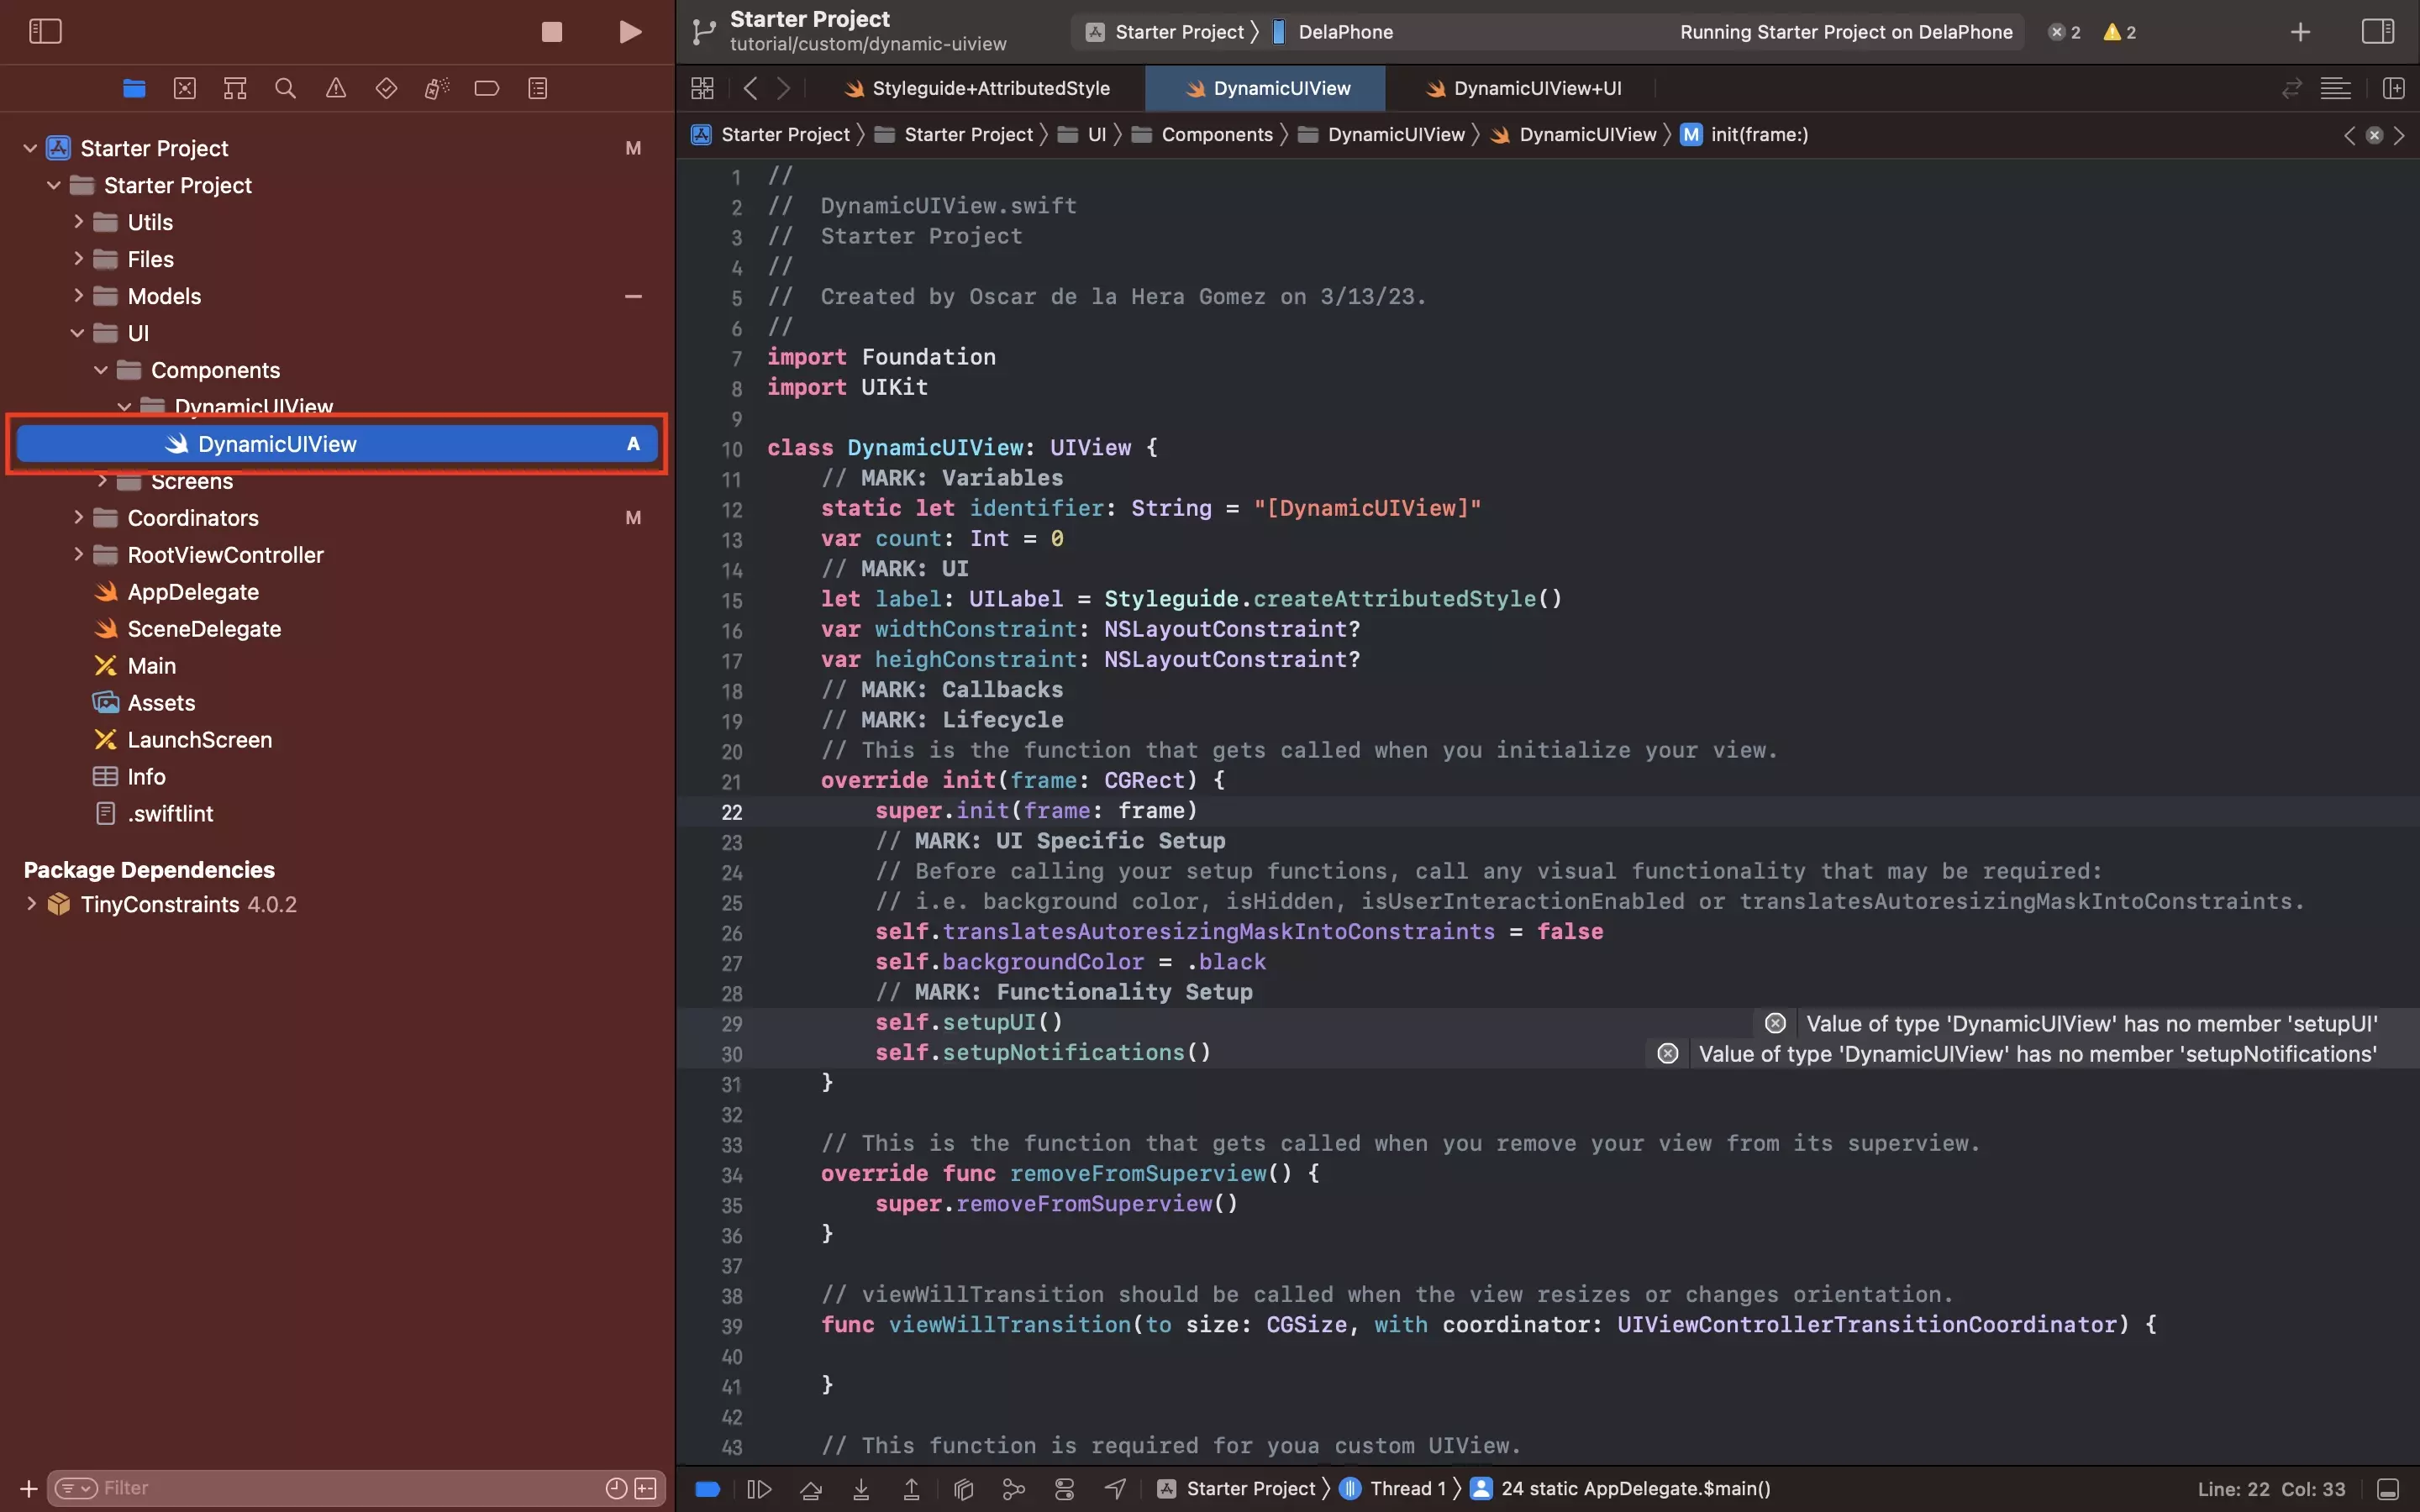 A screenshot of Xcode showing the DynamicUIView.swift file, the code is available below.